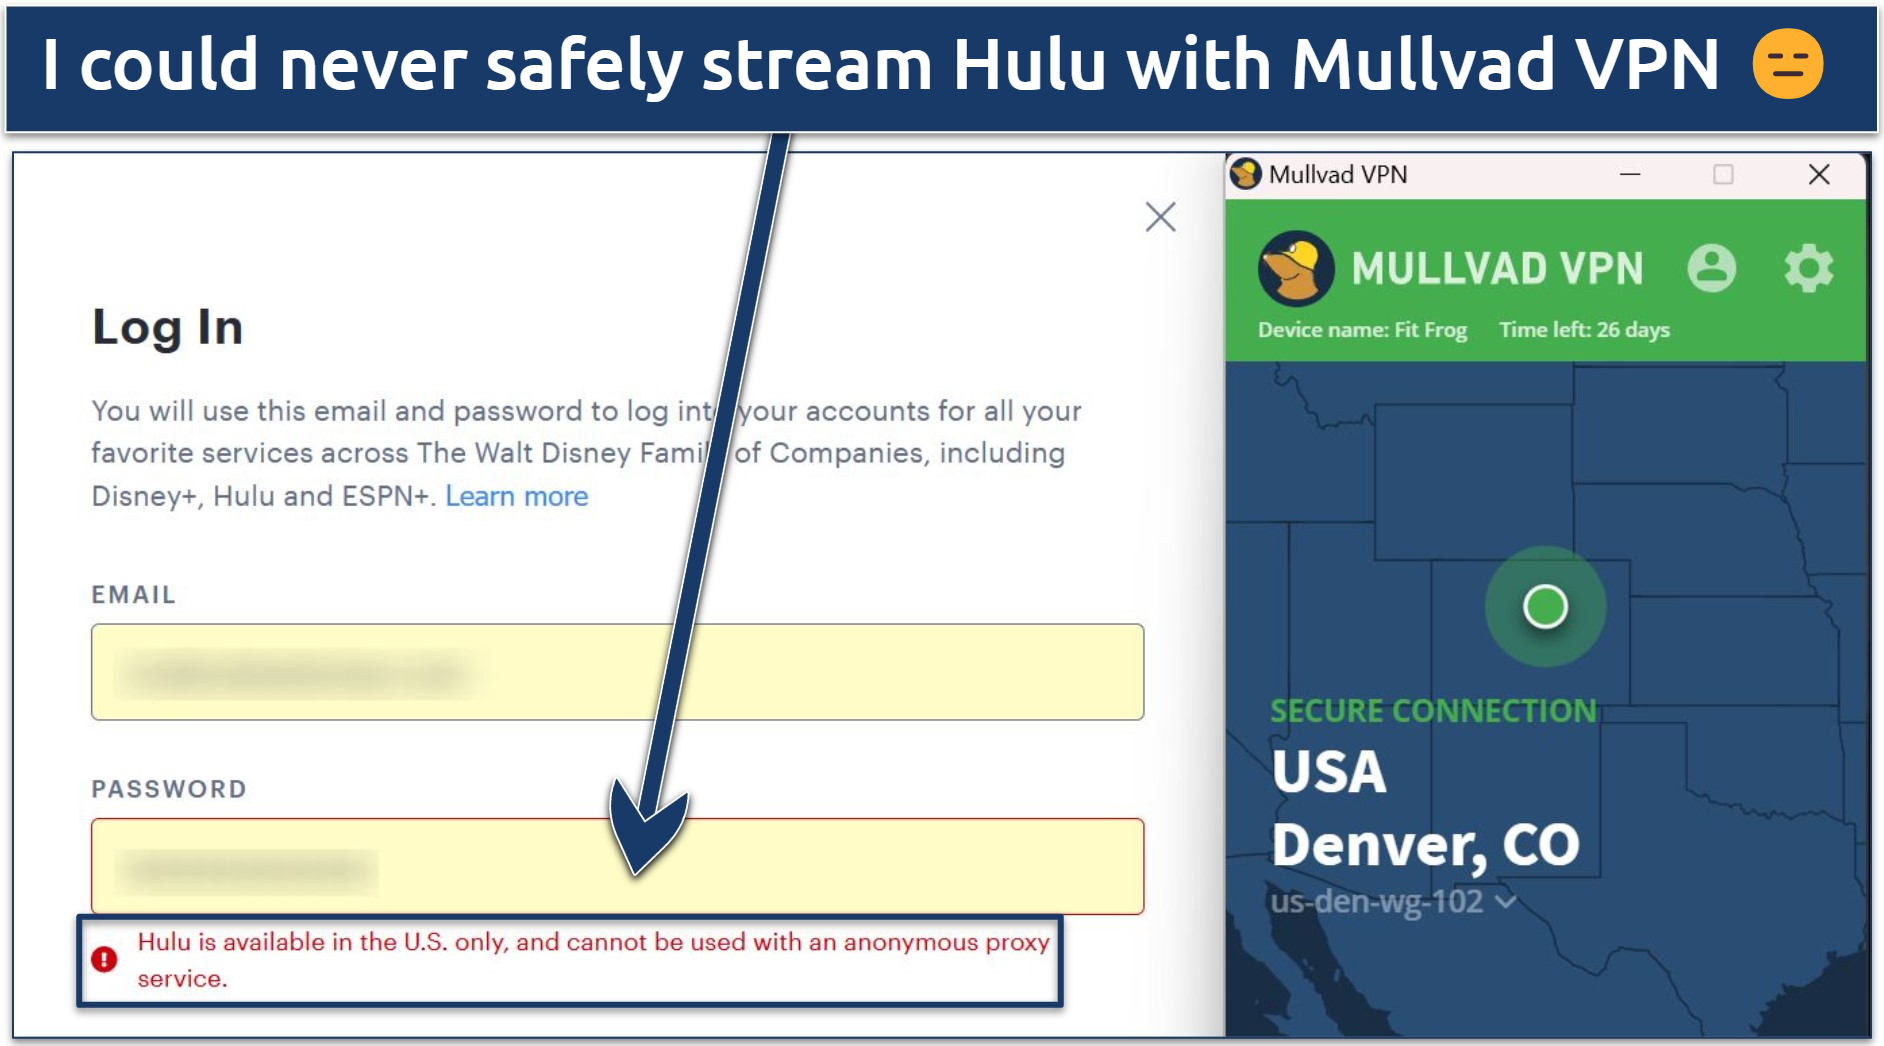 Screenshot of Hulu blocking a login attempt while connected to a Denver Mullvad server